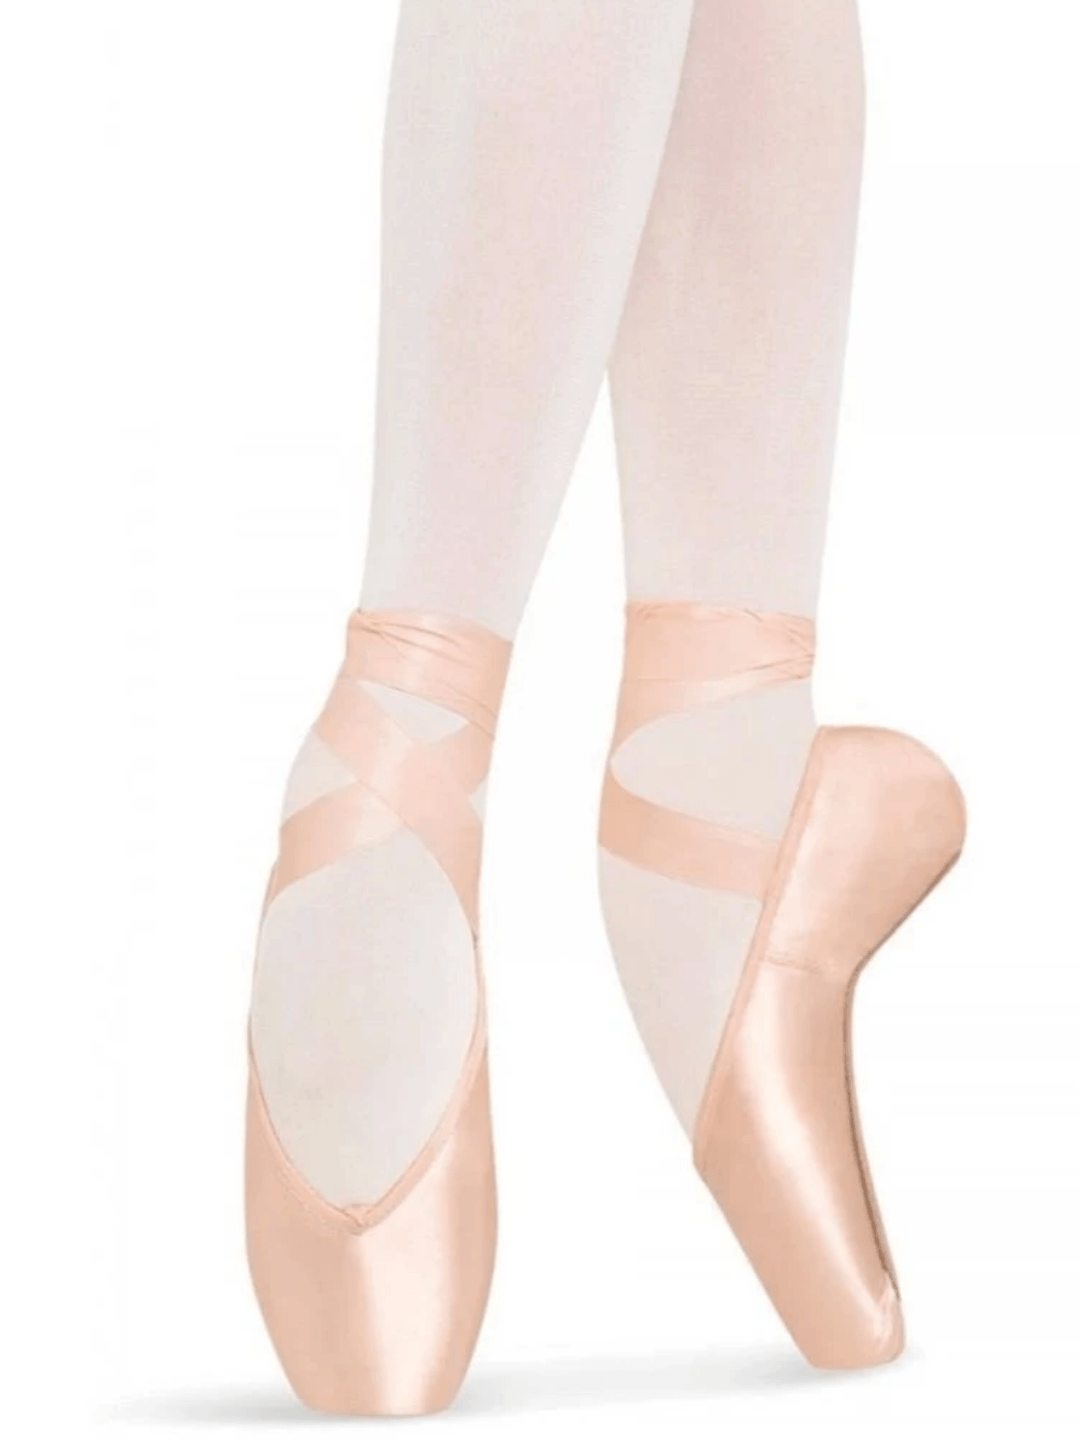 3 TYPES OF POINTE SHOE RIBBONS